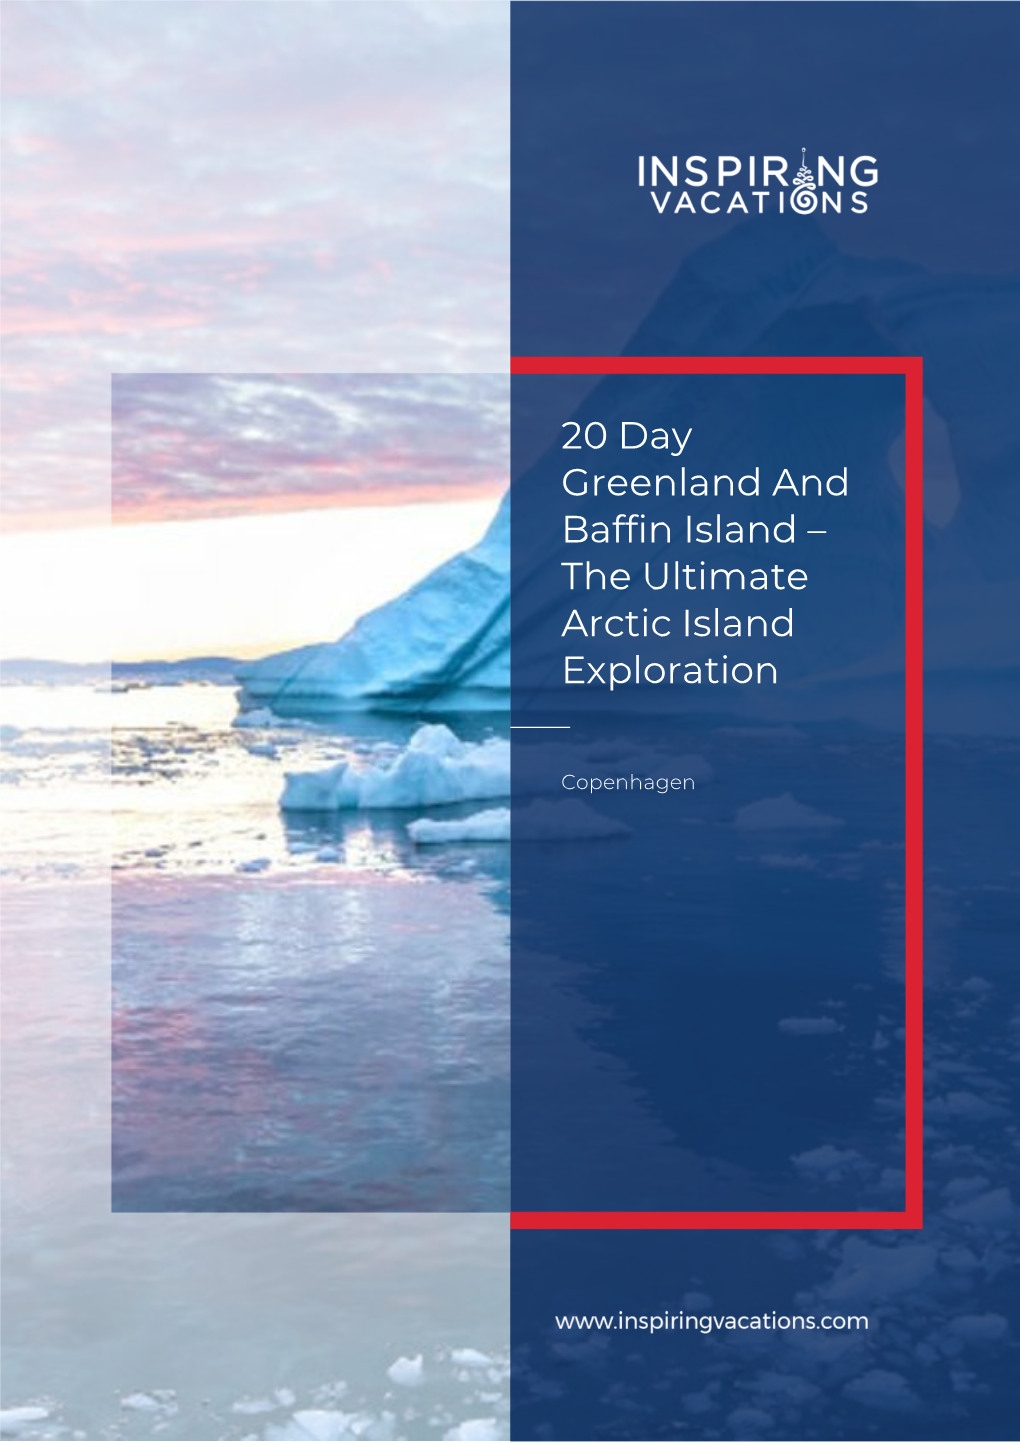 20 Day Greenland and Baffin Island – the Ultimate Arctic Island Exploration